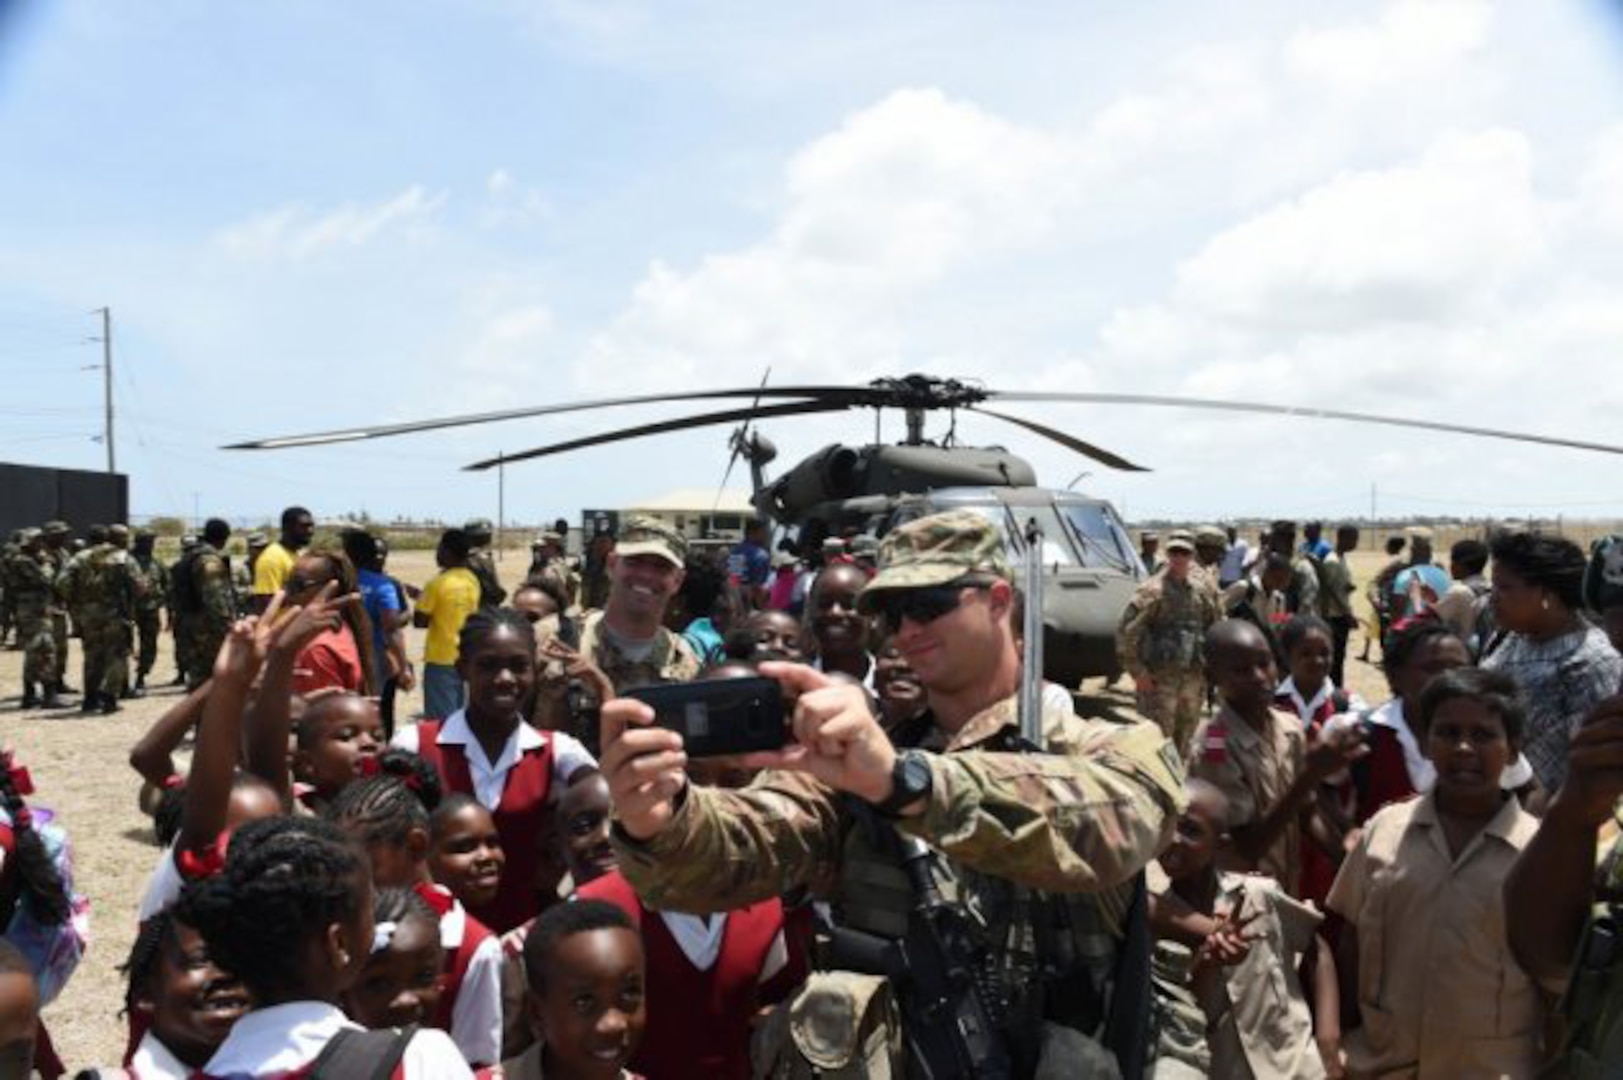 Florida Army National Guard 2nd lt. Ryan Noblitt, assigned to Delta Company, 1-124 Infantry, 53rd Brigade Combat Team, takes a selfie with schoolchildren and another Soldier in his unit, Staff Sgt. Edward Roseman during a community relations (COMREL) event on board Paragon Base. The students visited the base to participate in a Tradewinds 2017 COMREL event.